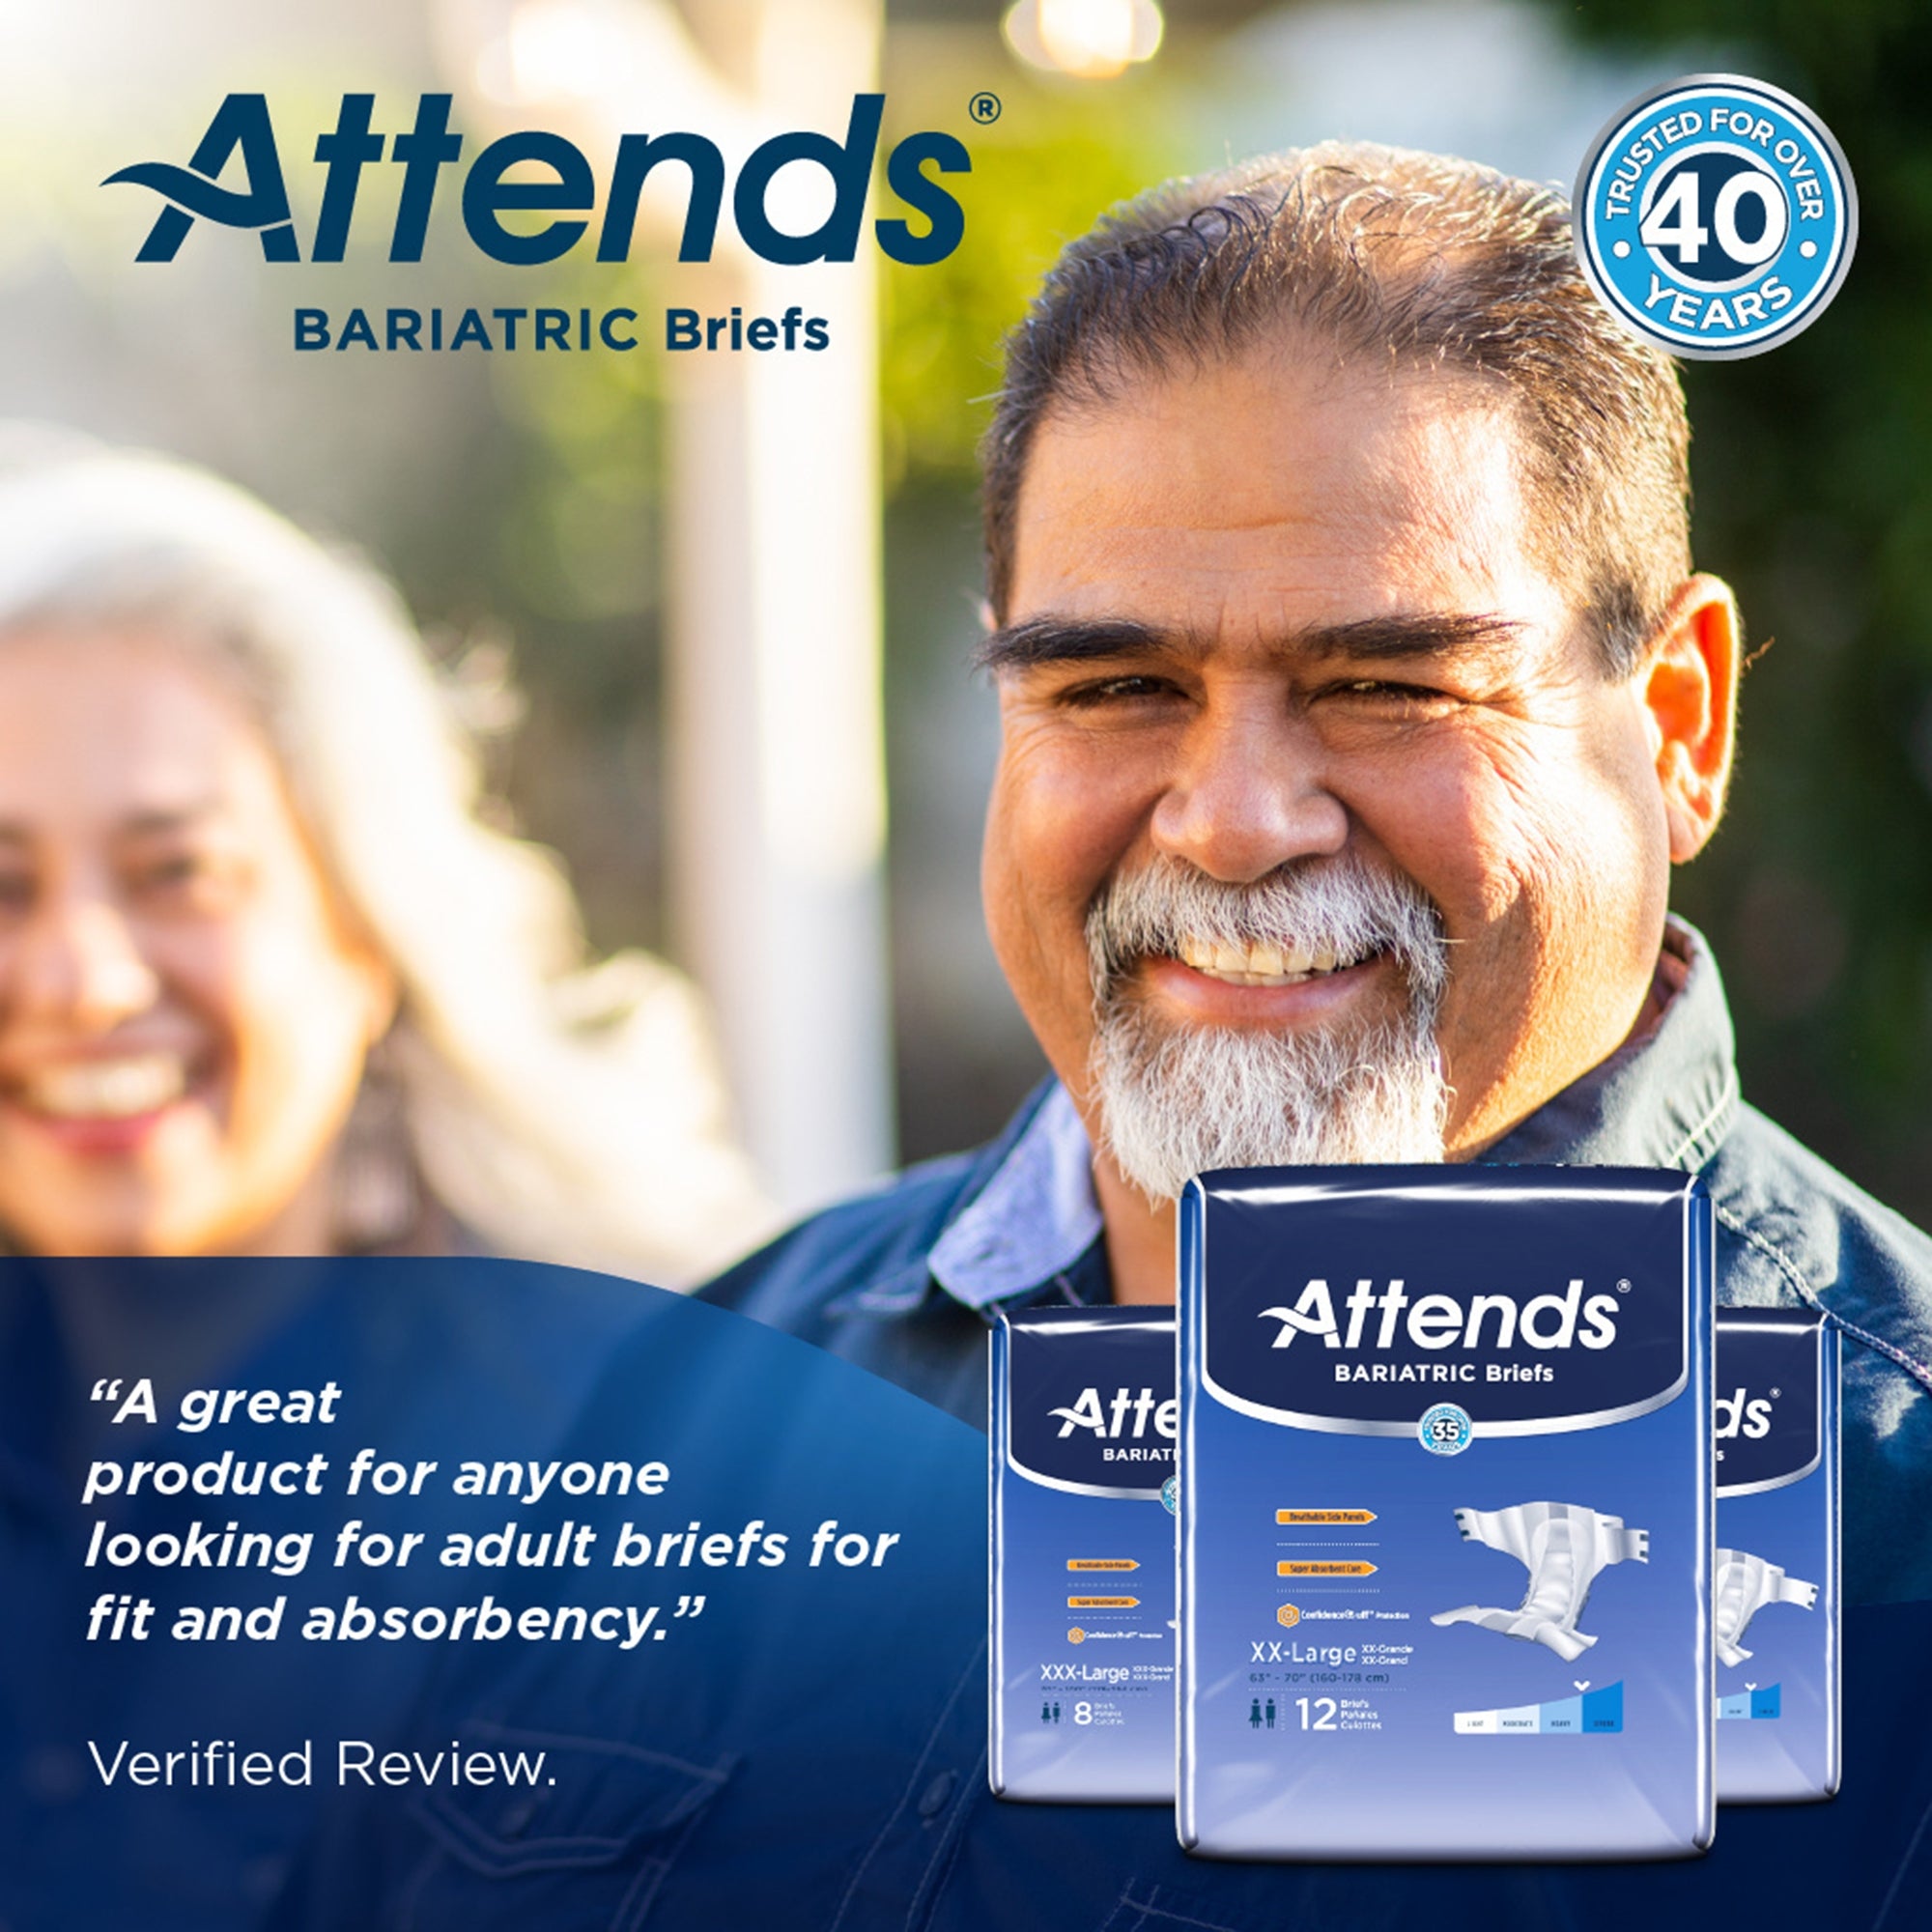 Attends® Bariatric Briefs 3XL - Heavy Absorbency Adult Incontinence Care